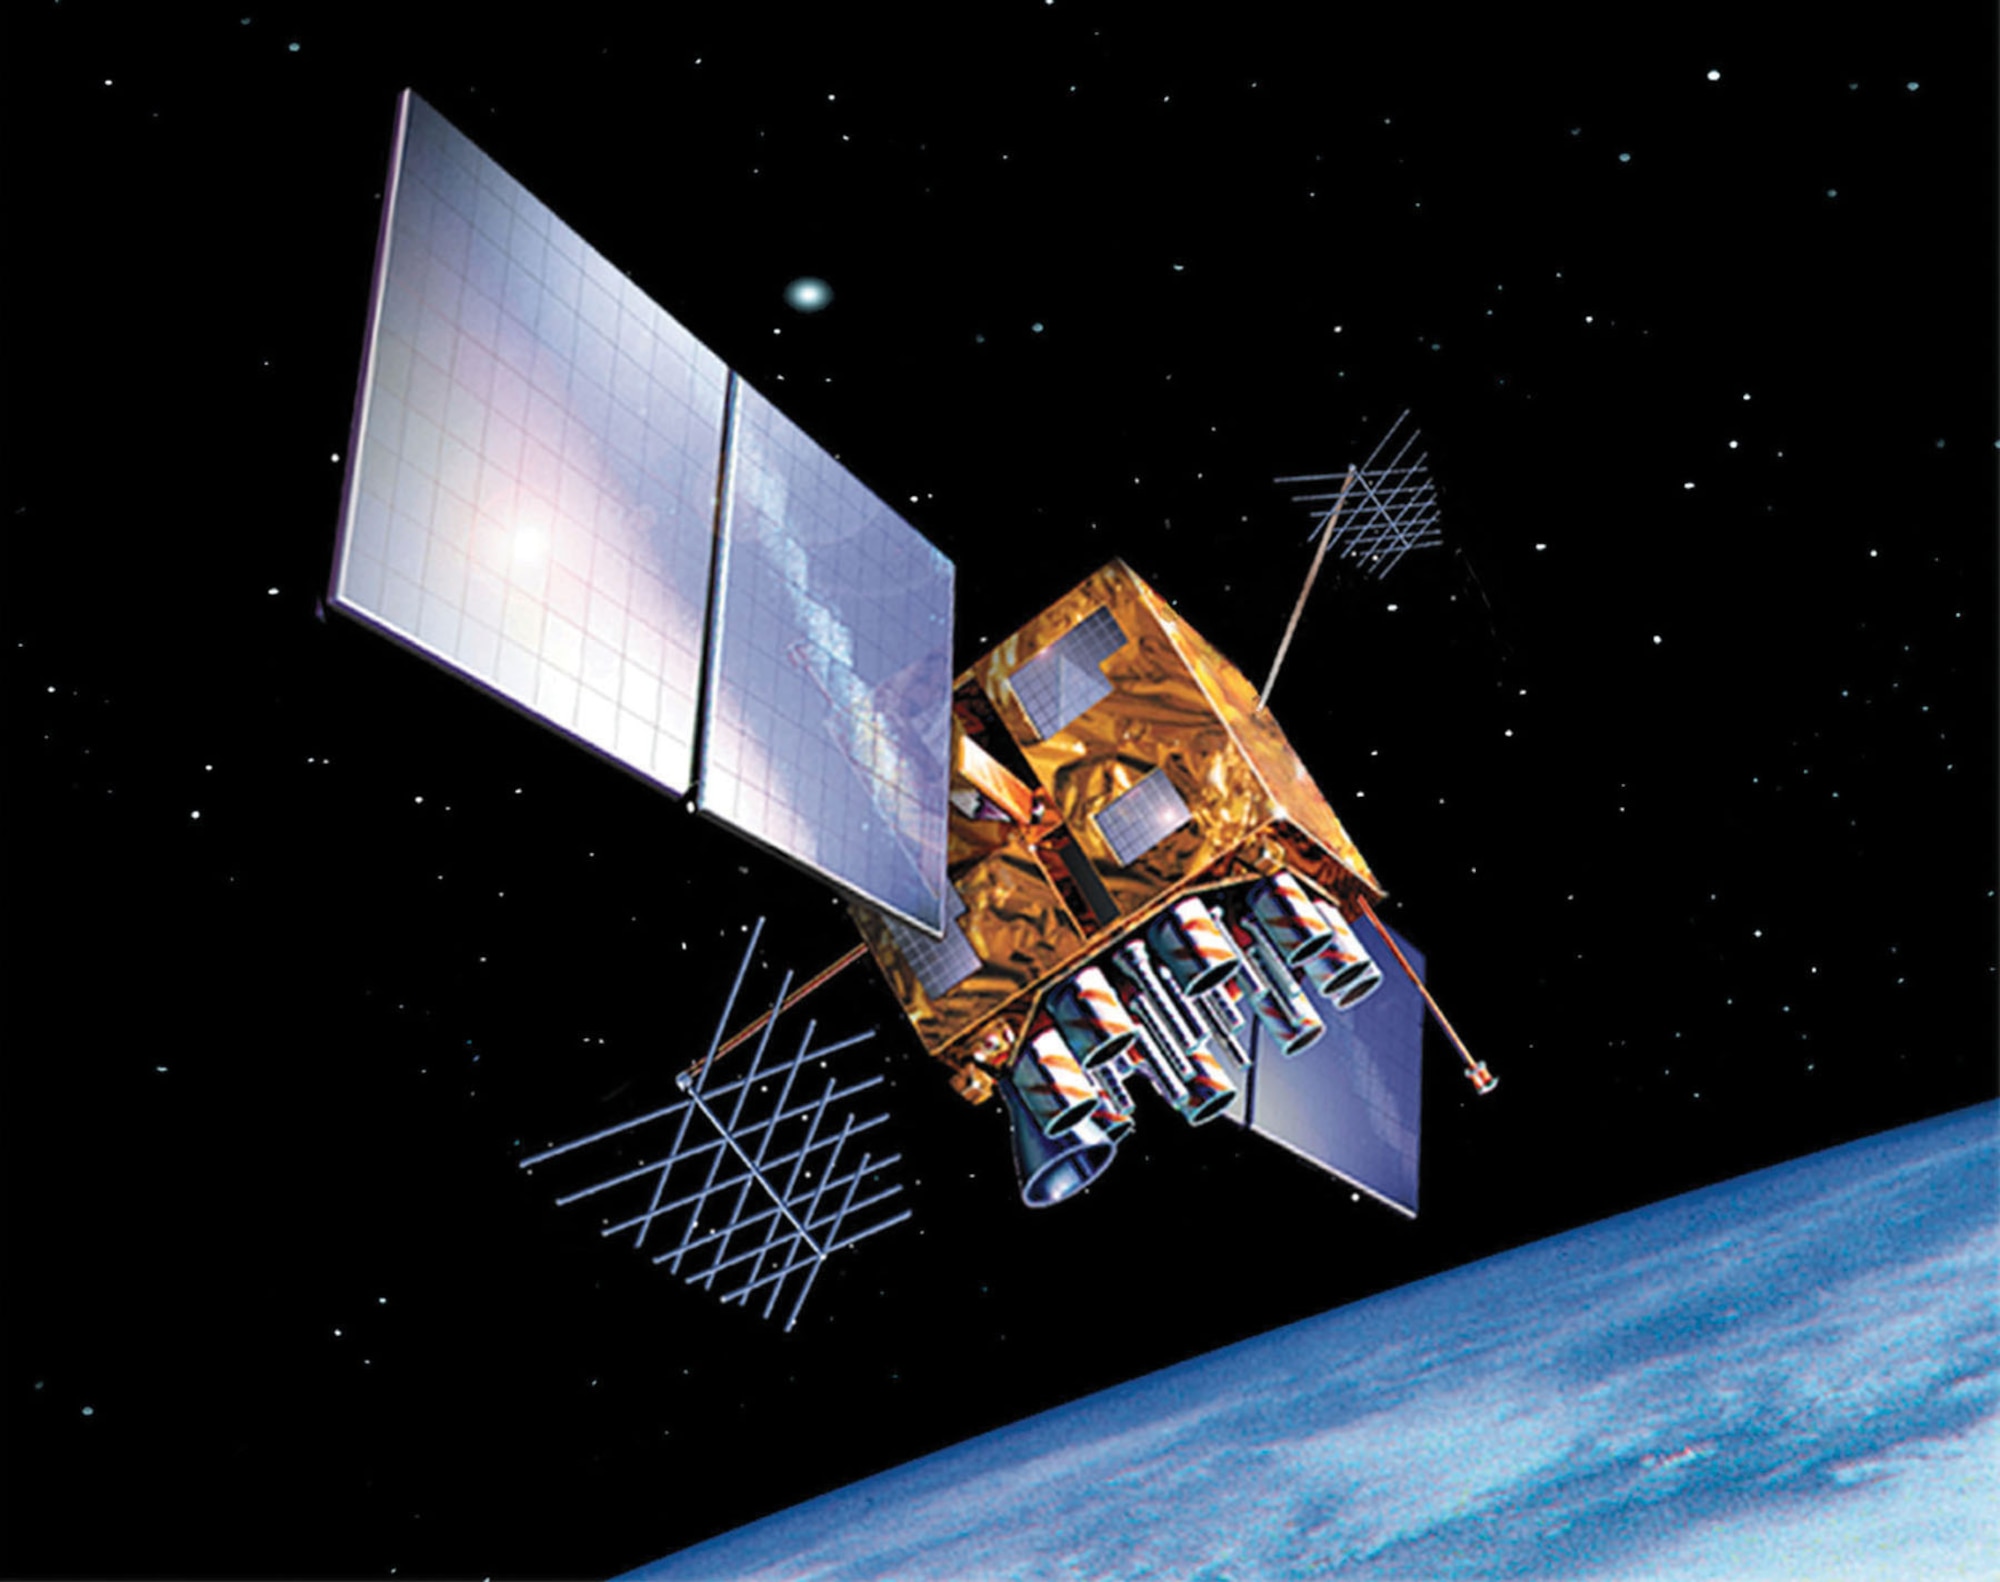 Learn about satellites during Family Day from 10 a.m.-3 p.m. on Feb. 16, 2013, at the National Museum of the U.S. Air Force.